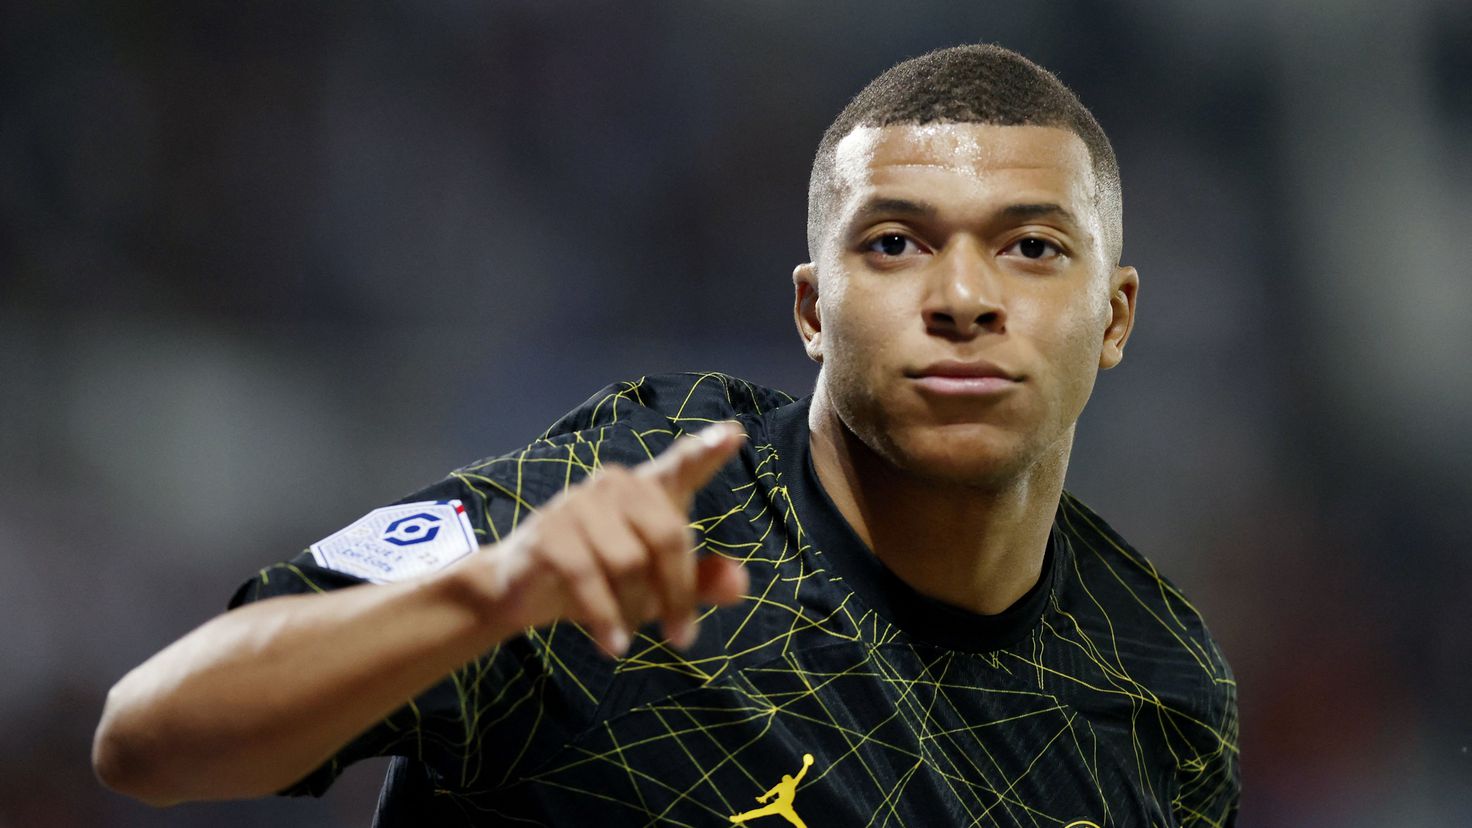 L'Équipe: Mbappé does not want to activate the renewal clause
